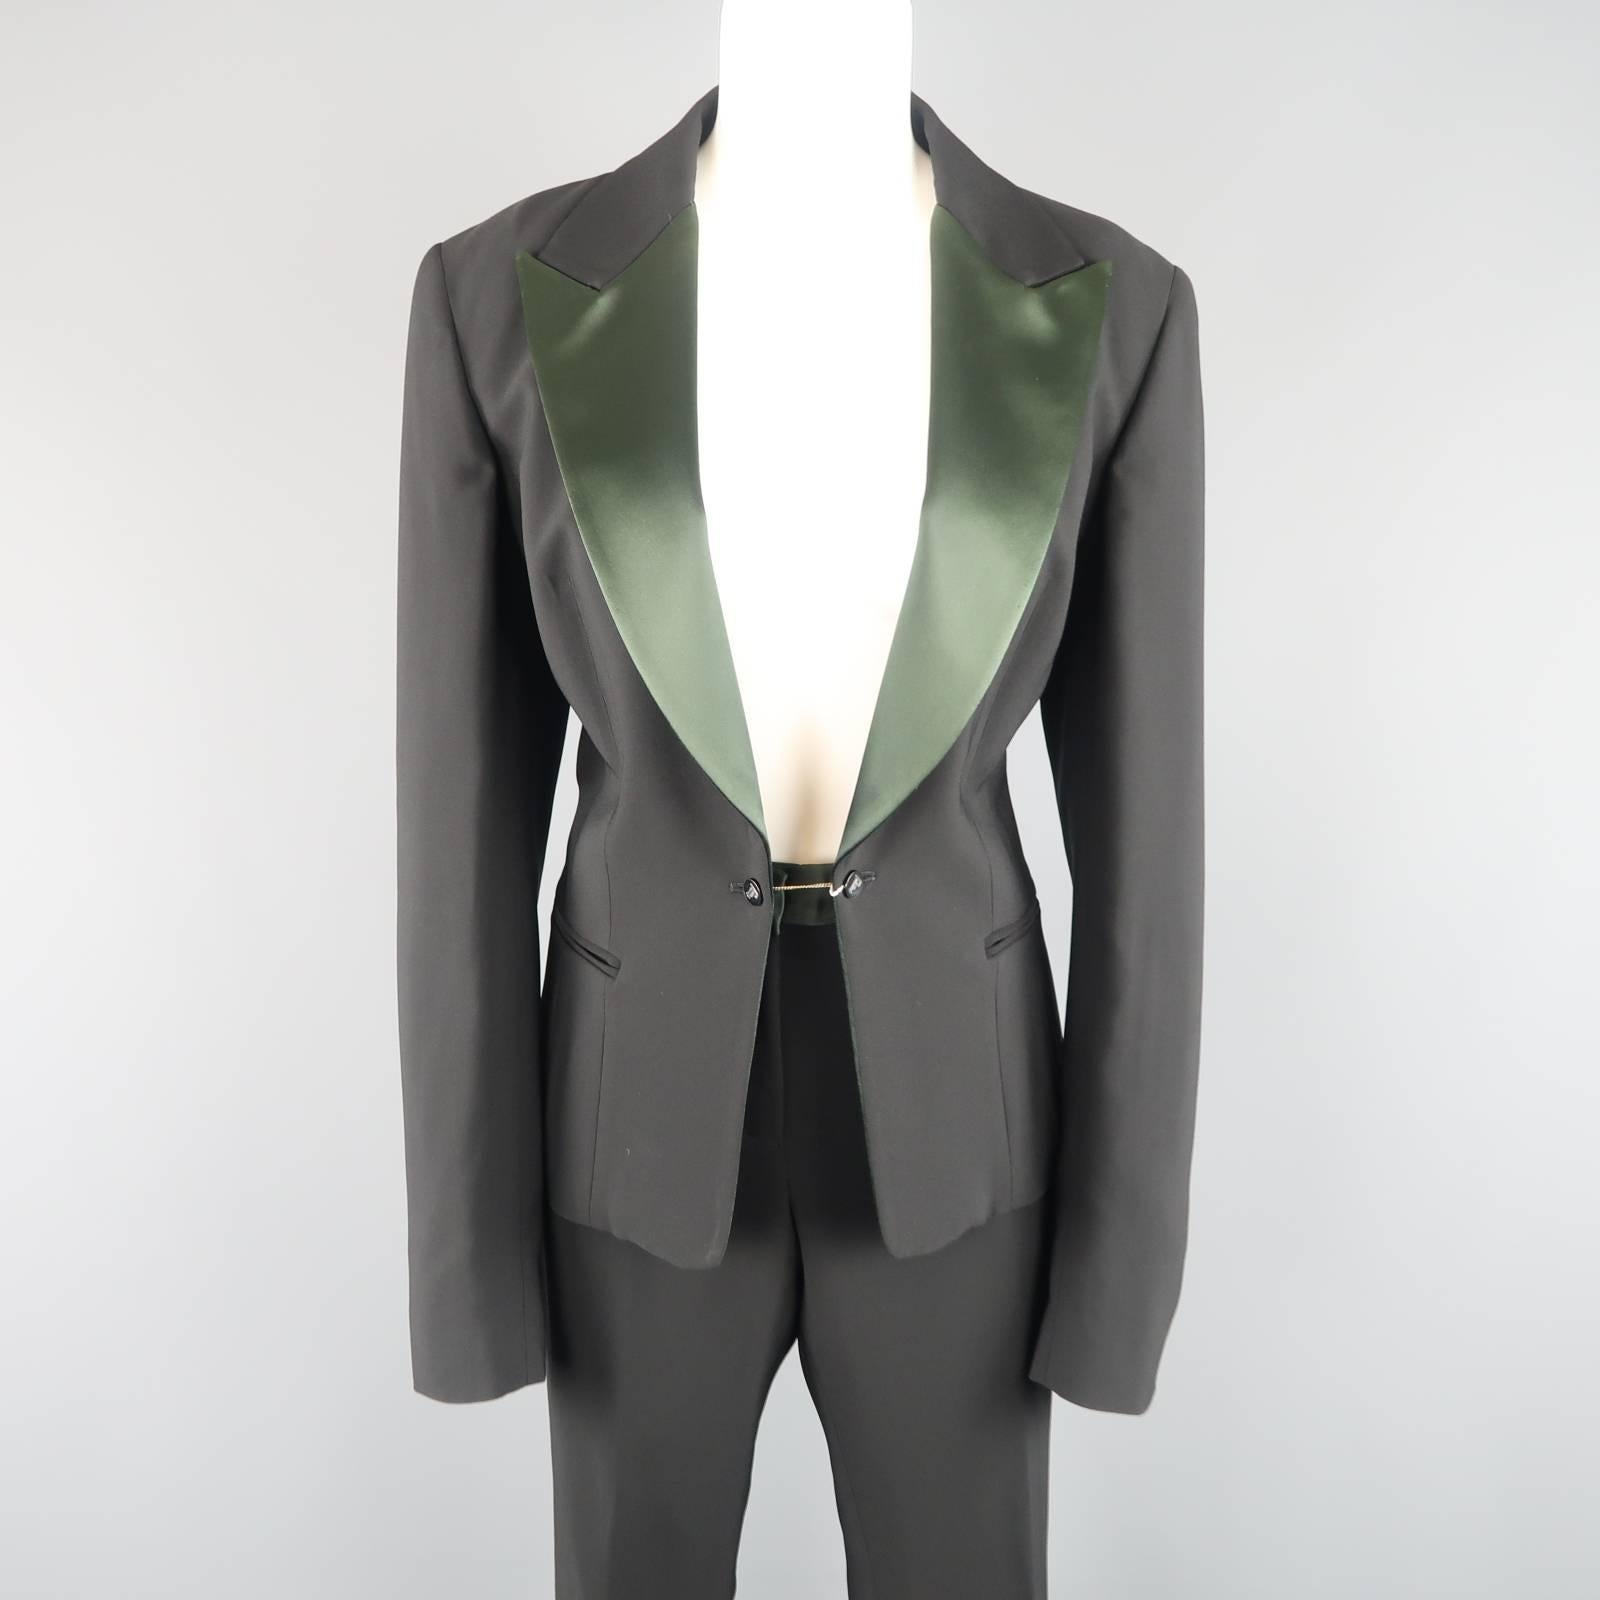 Fabulous GIANFANCO FERRE tuxedo comes in a rayon blend crepe textured fabric and includes a tailored jacket with green satin peak lapel and chain closure and  matching trousers with green waistband and side stripe. Made in Italy.
 
New with Tags.